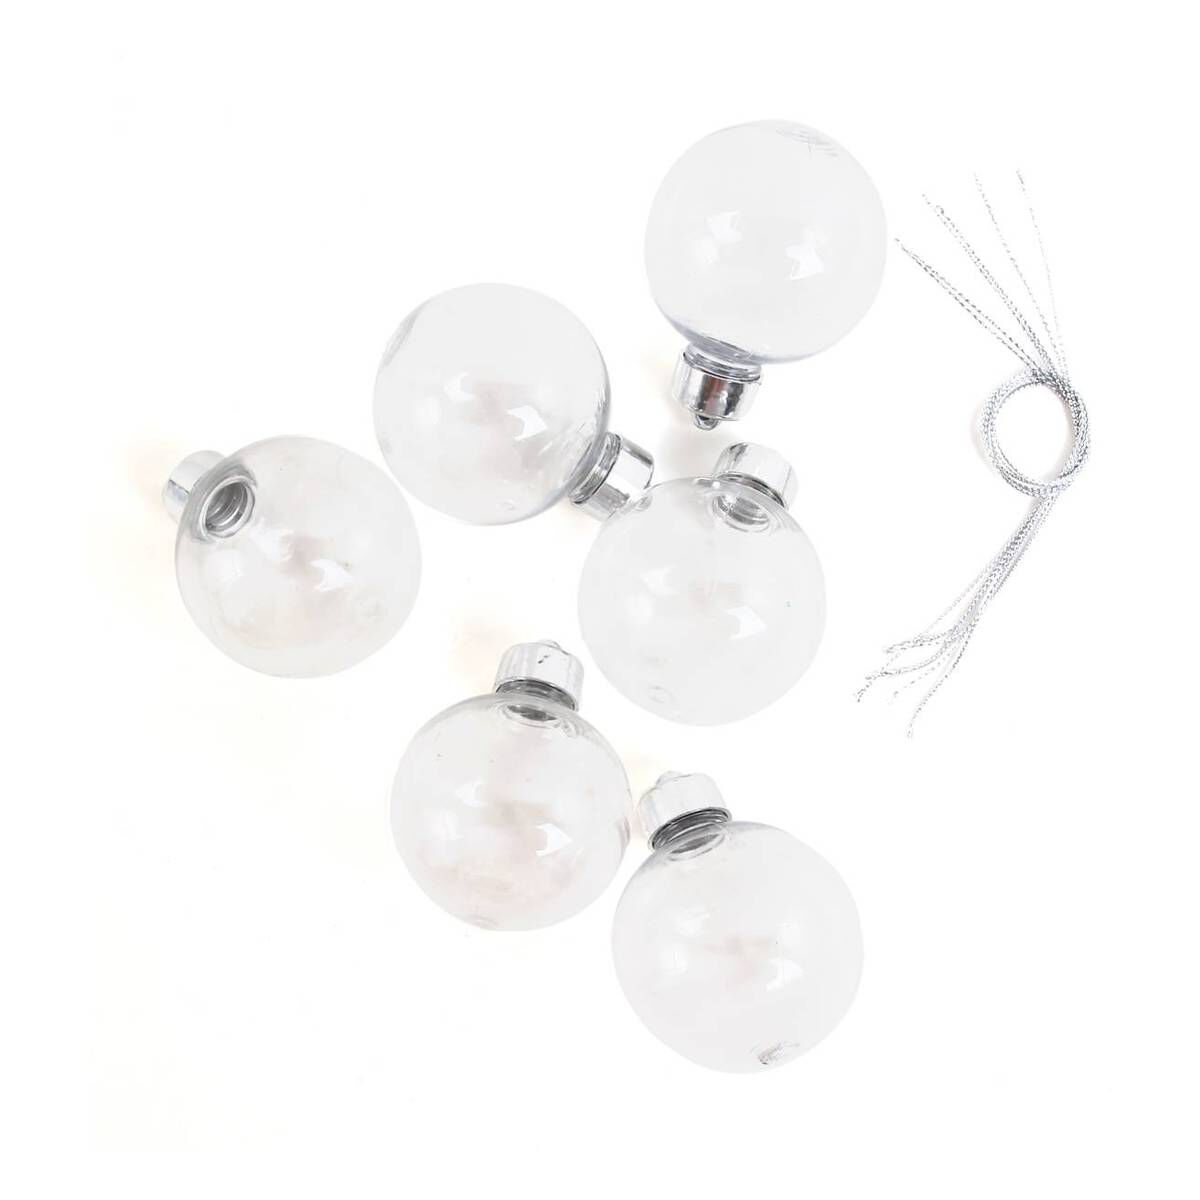 Hanging Fillable Baubles 6cm 6 Pack